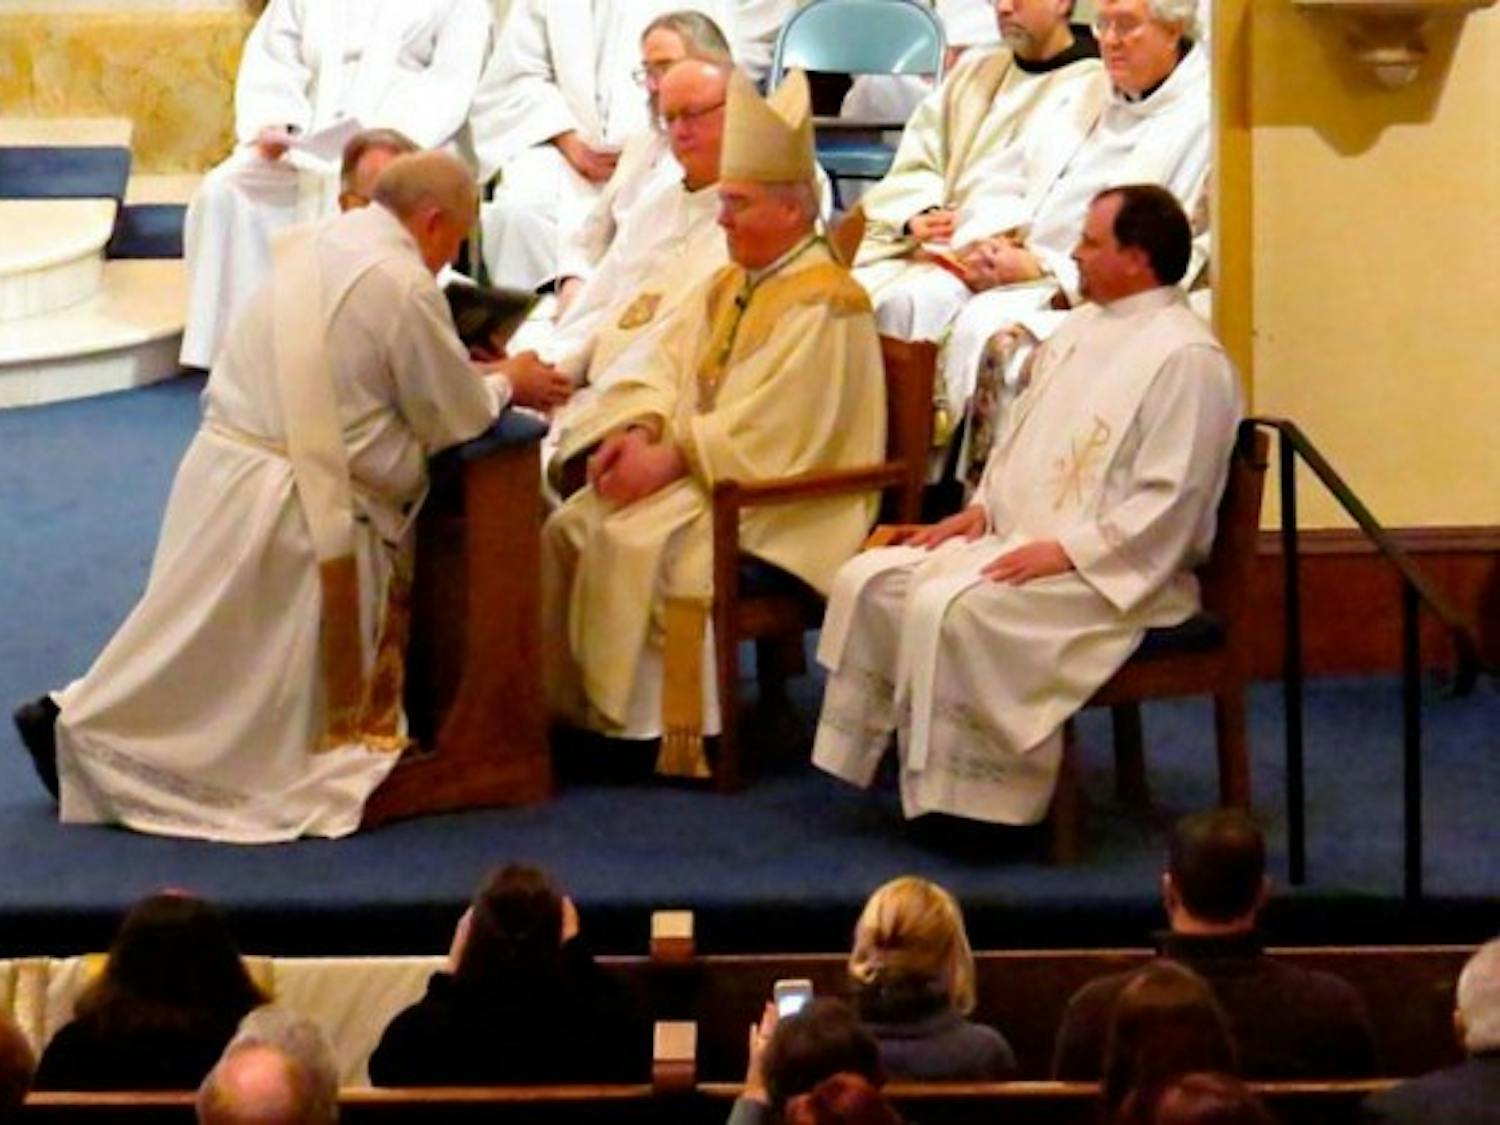 On Jan. 26, John Cornelius was ordained a priest by Buffalo Bishop Richard Malone. Cornelius is the first married Catholic priest in the Catholic Church, having spent 20 years as a priest in the Episcopalian Church before retiring and converting to Catholicism. He was allowed to be ordained a priest in the Catholic Church under a 2012 papal exception to the Church's celibacy rule.